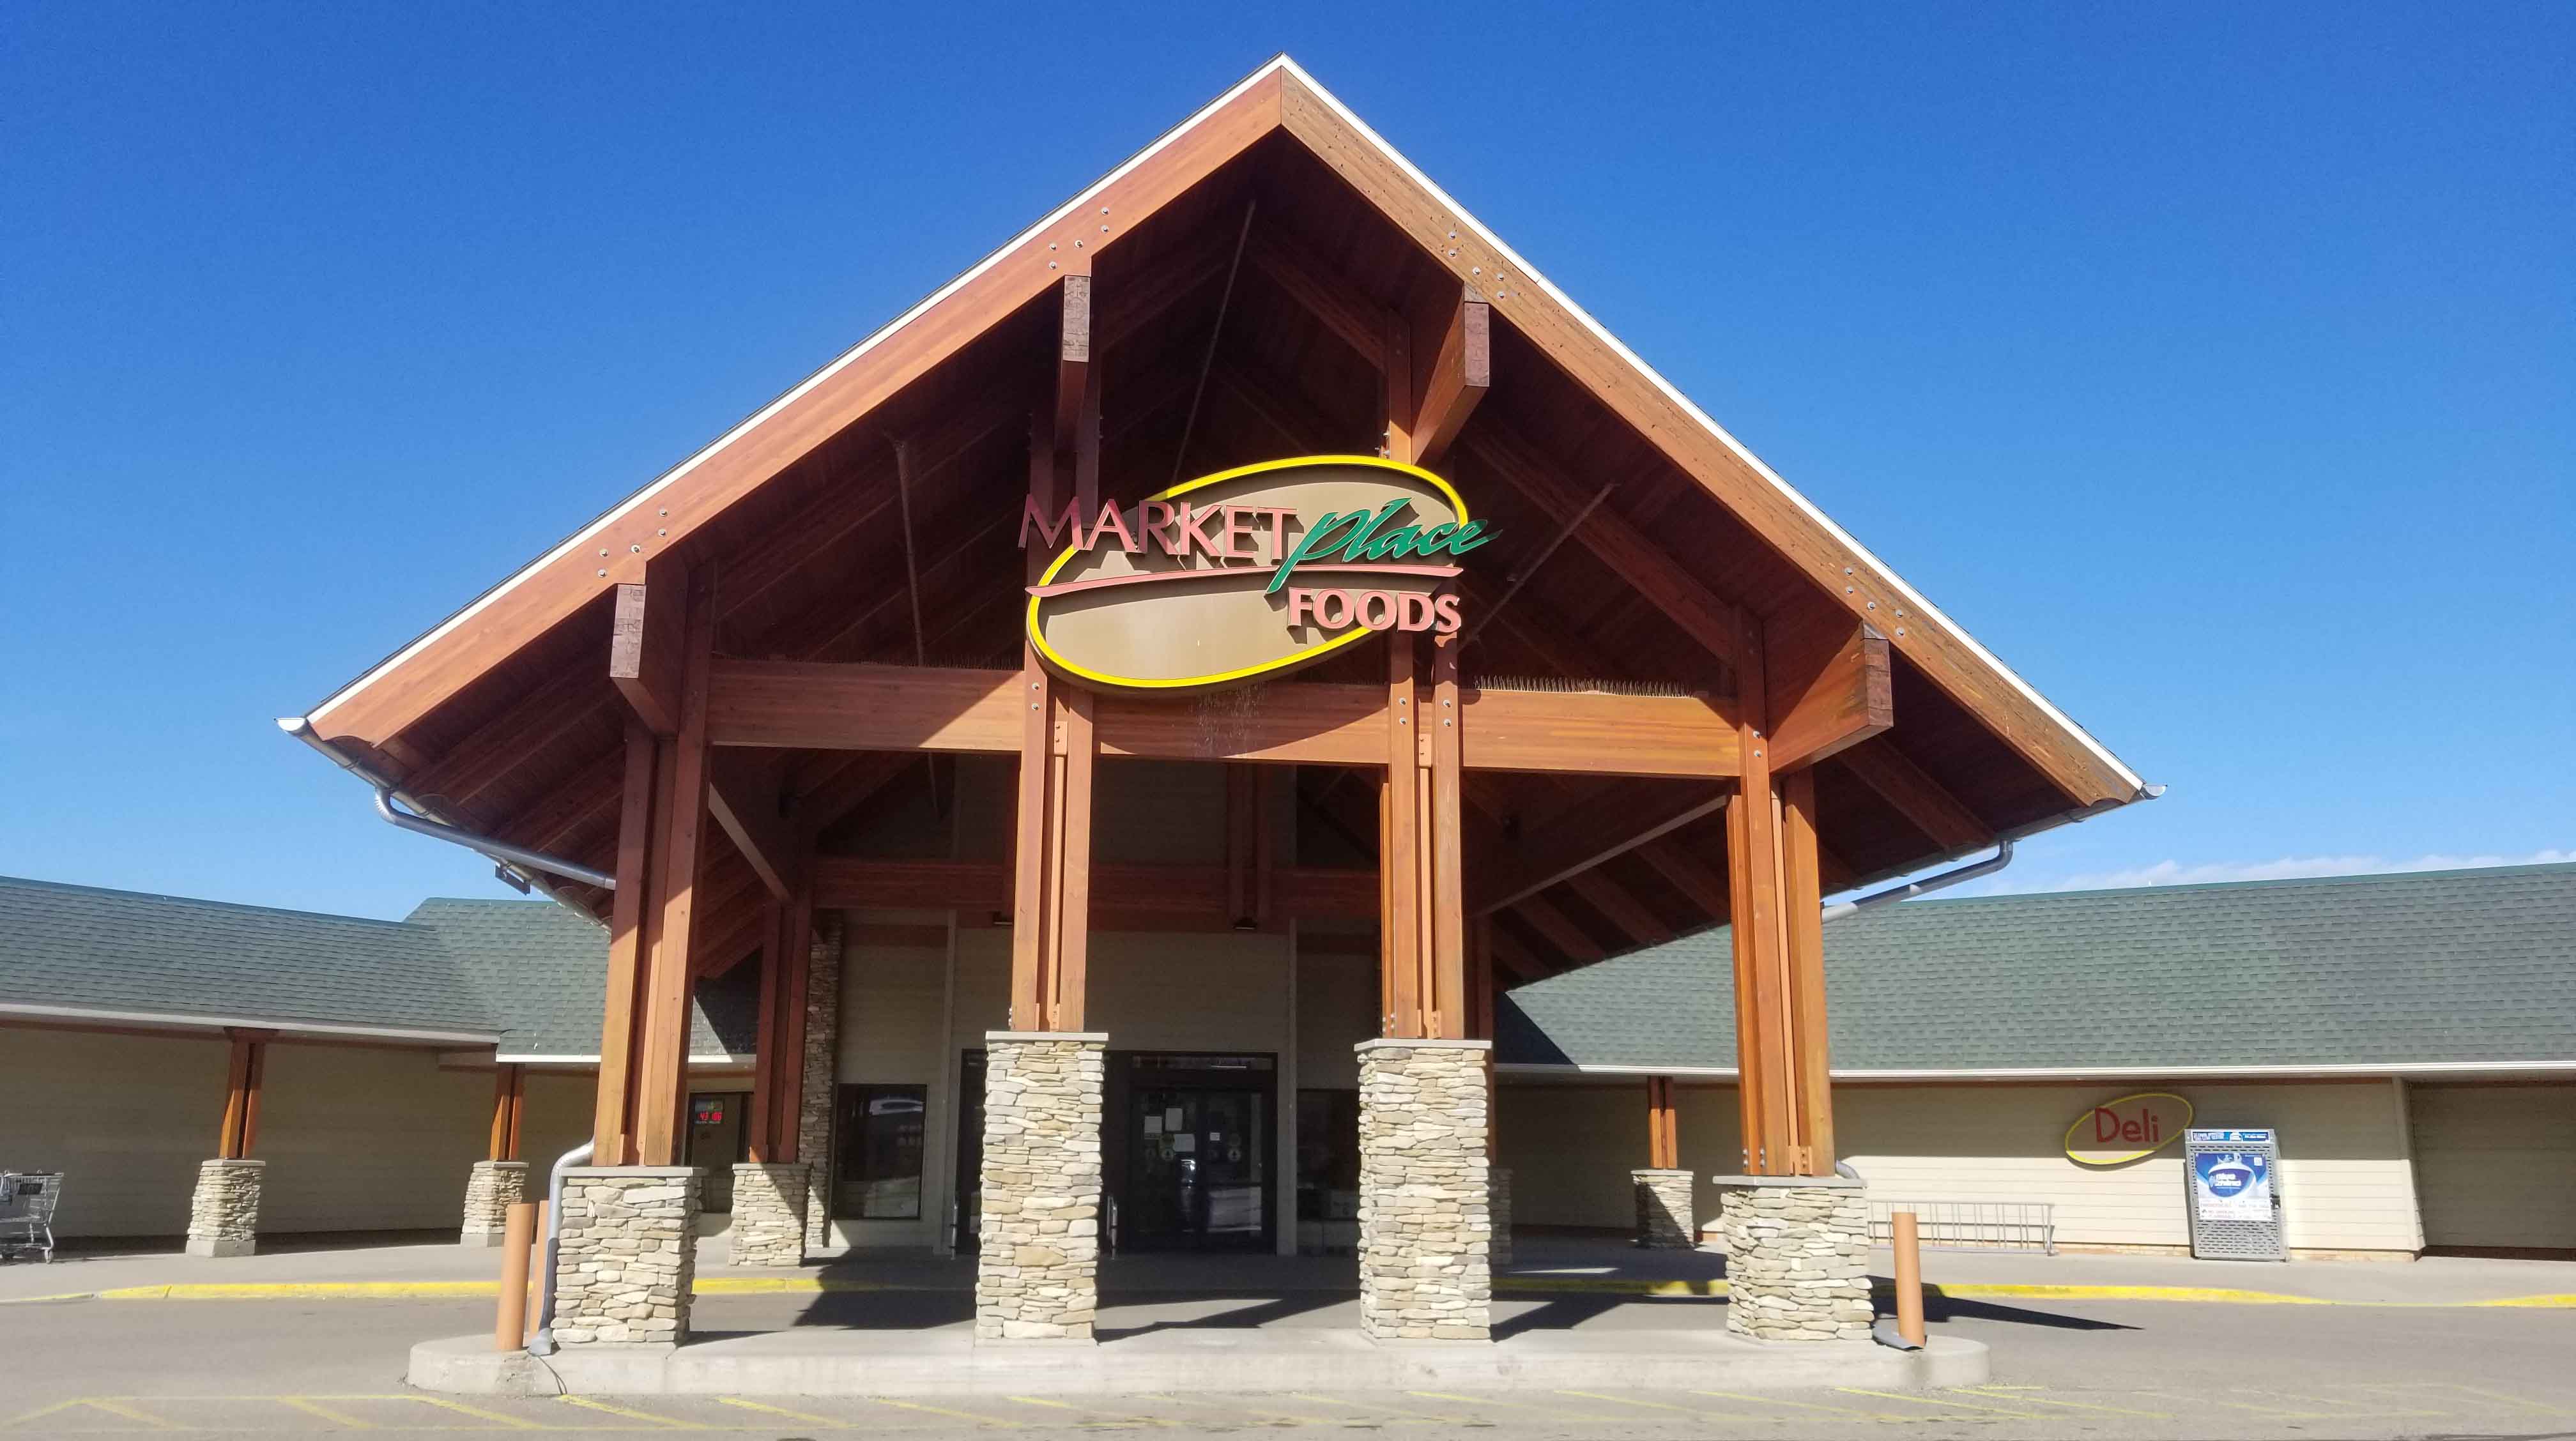 Our store located in the Arrowhead shopping center in Minot, North Dakota.